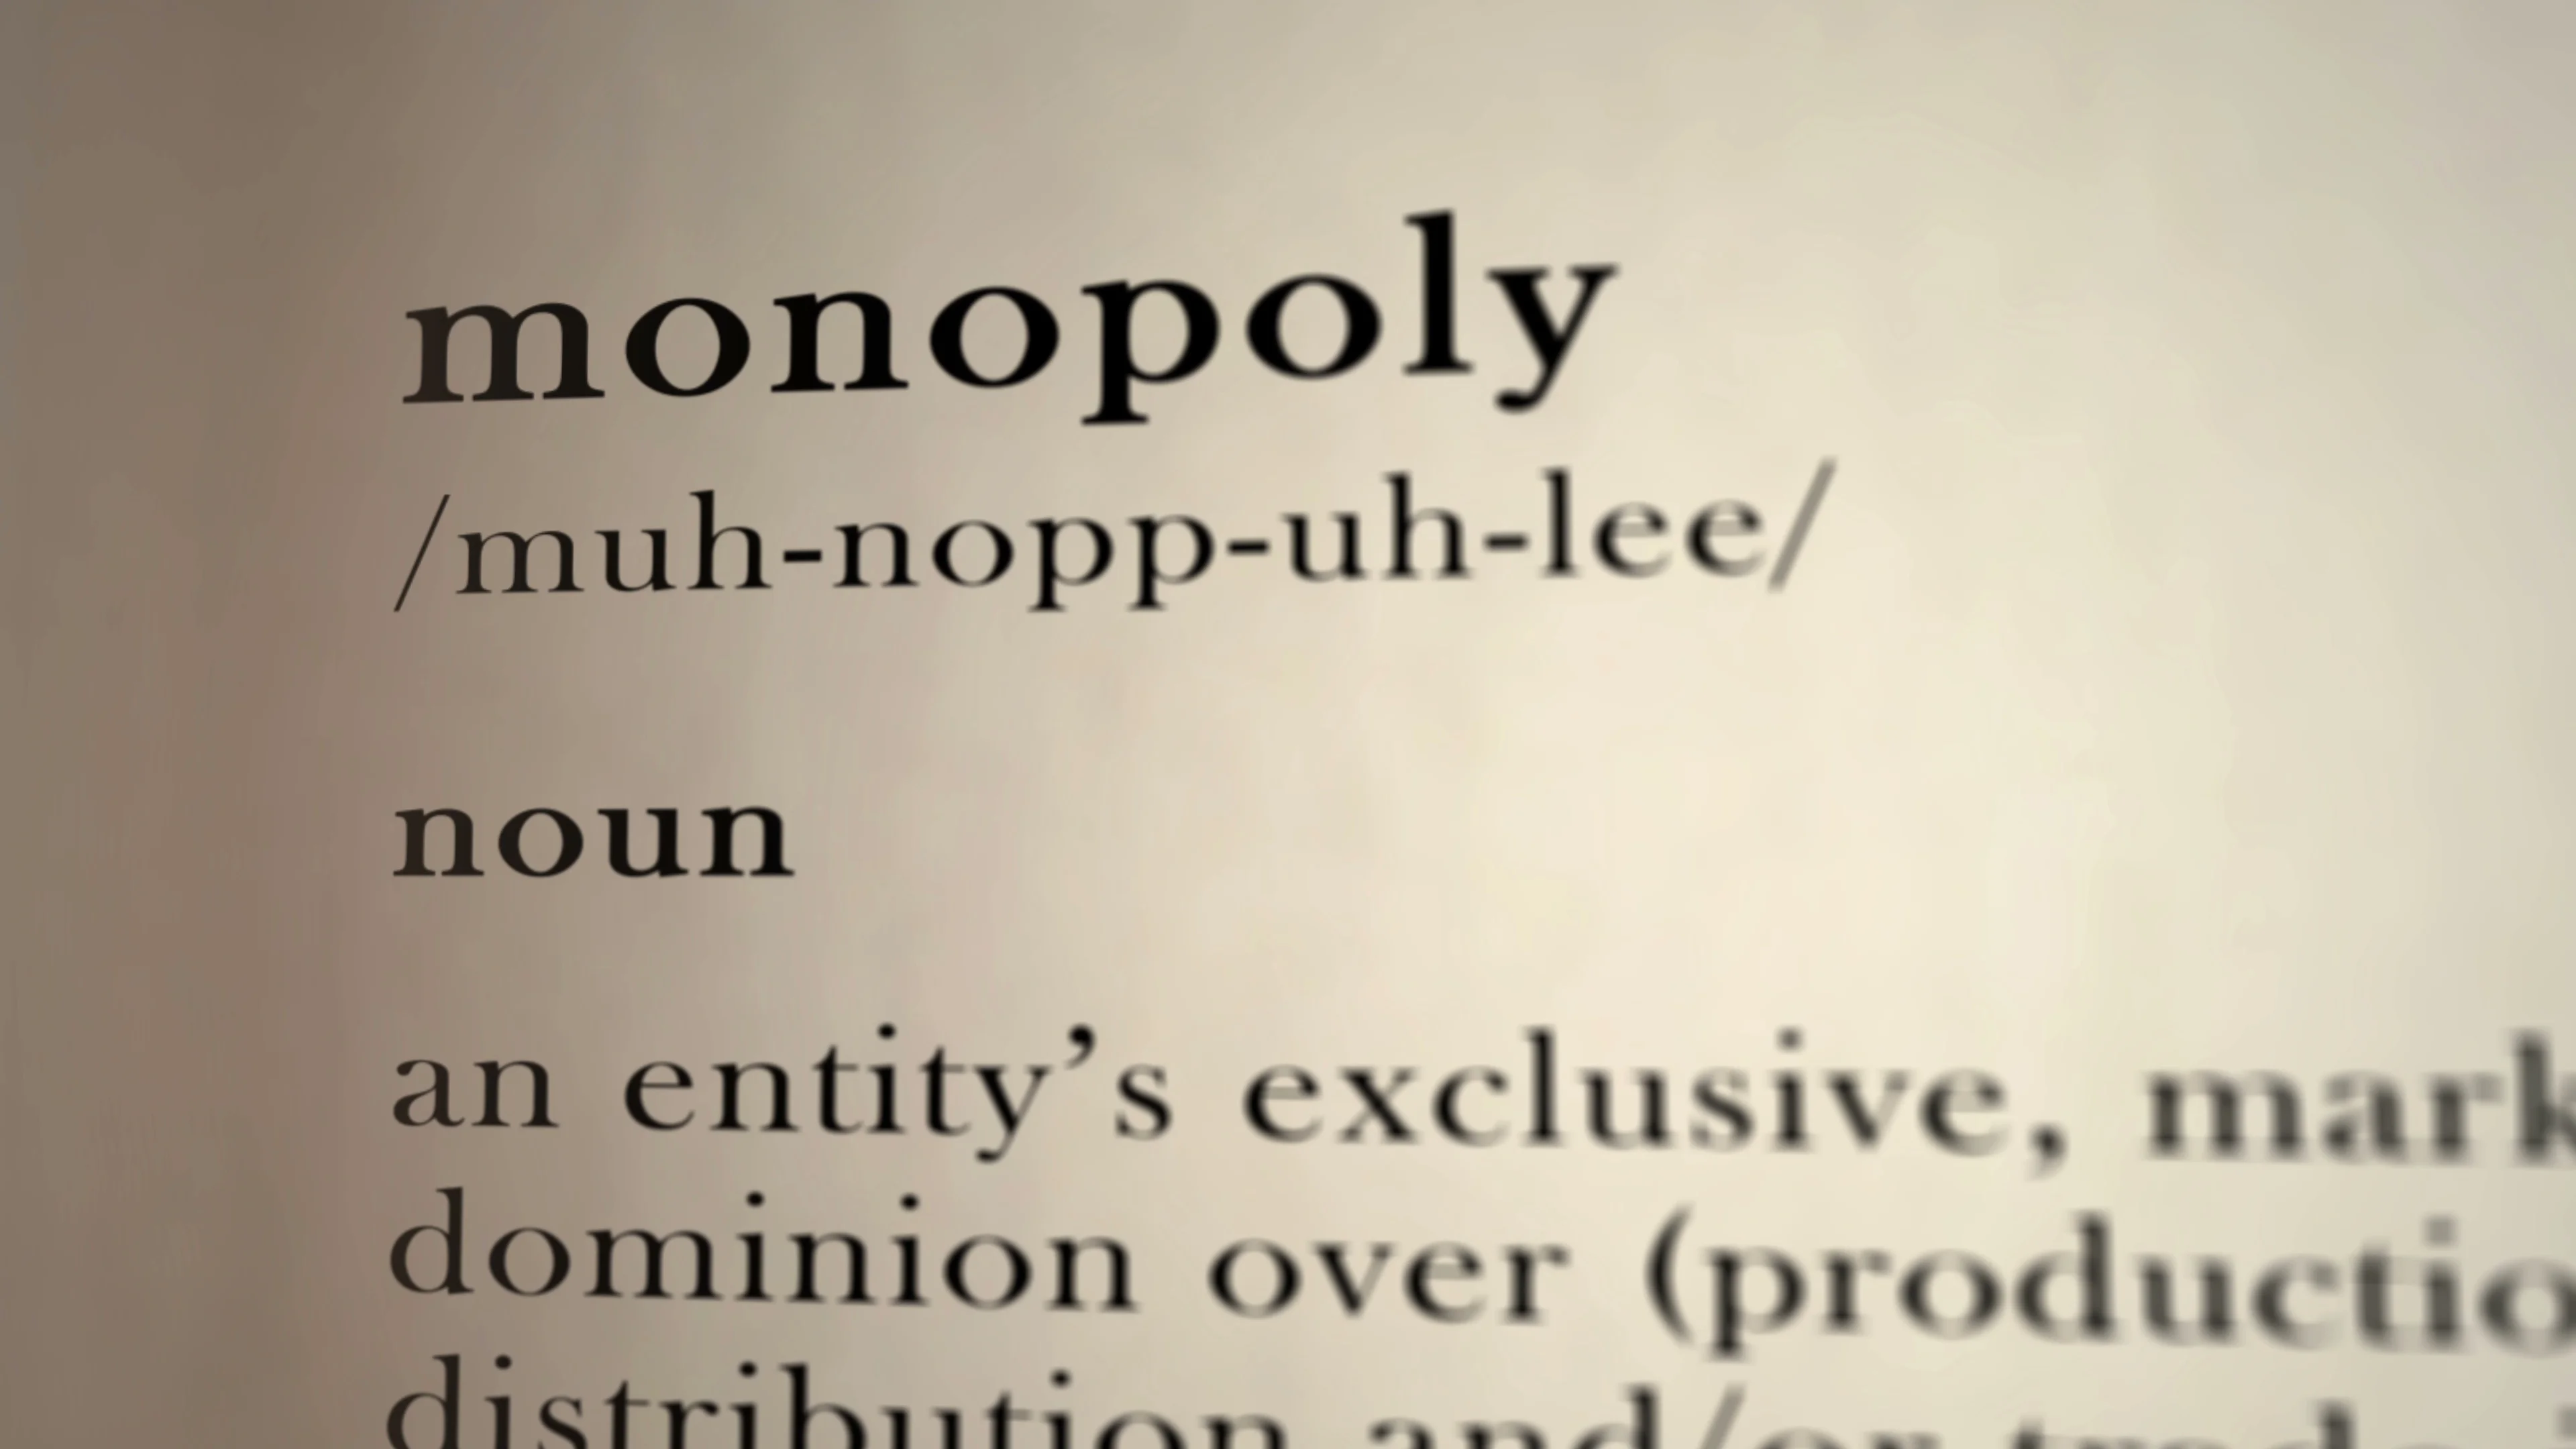 monopoly definition